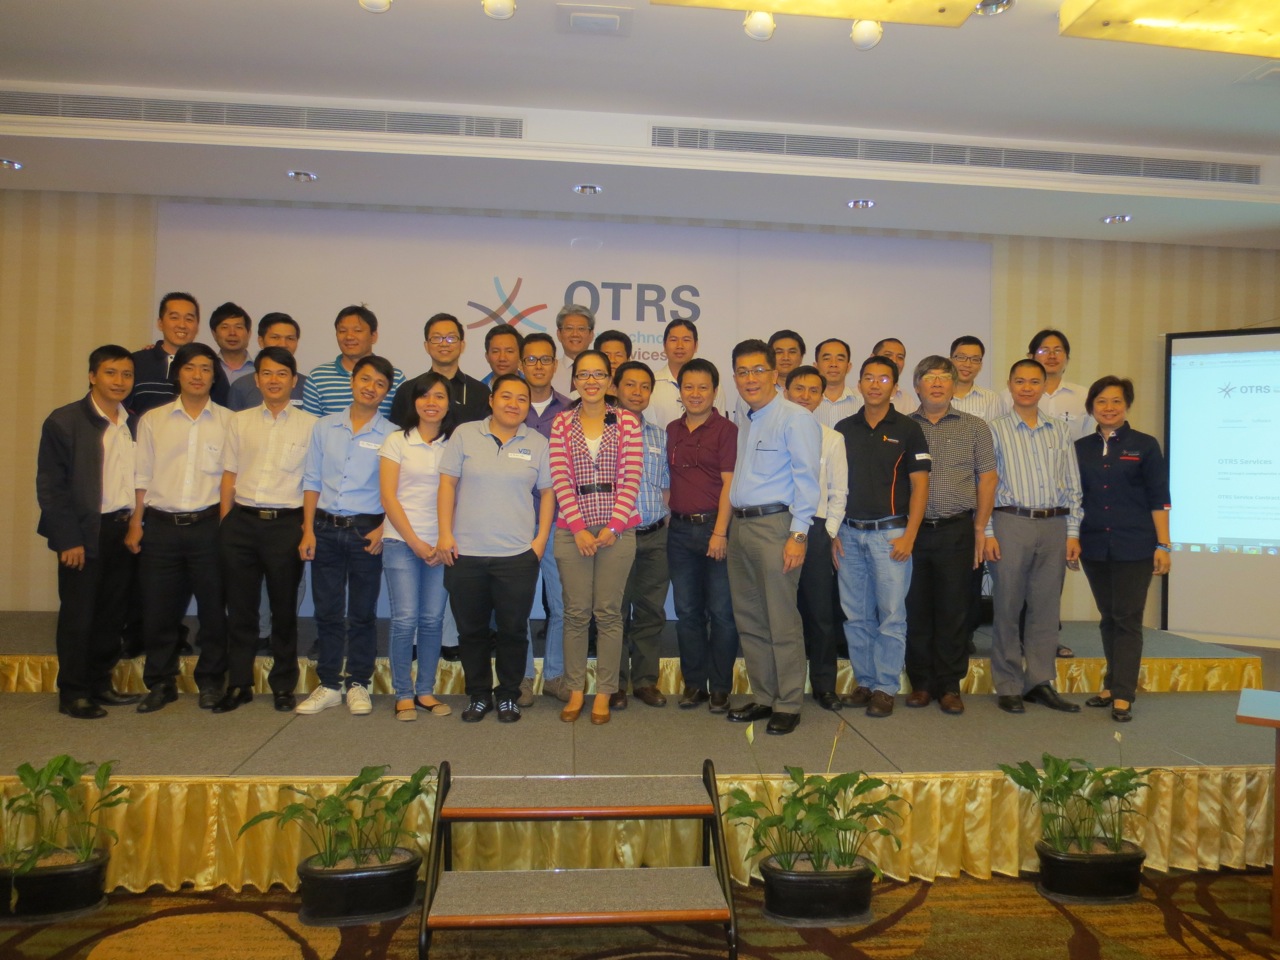 Visitors of the OTRS User Group Meeting in Saigon, Vietnam